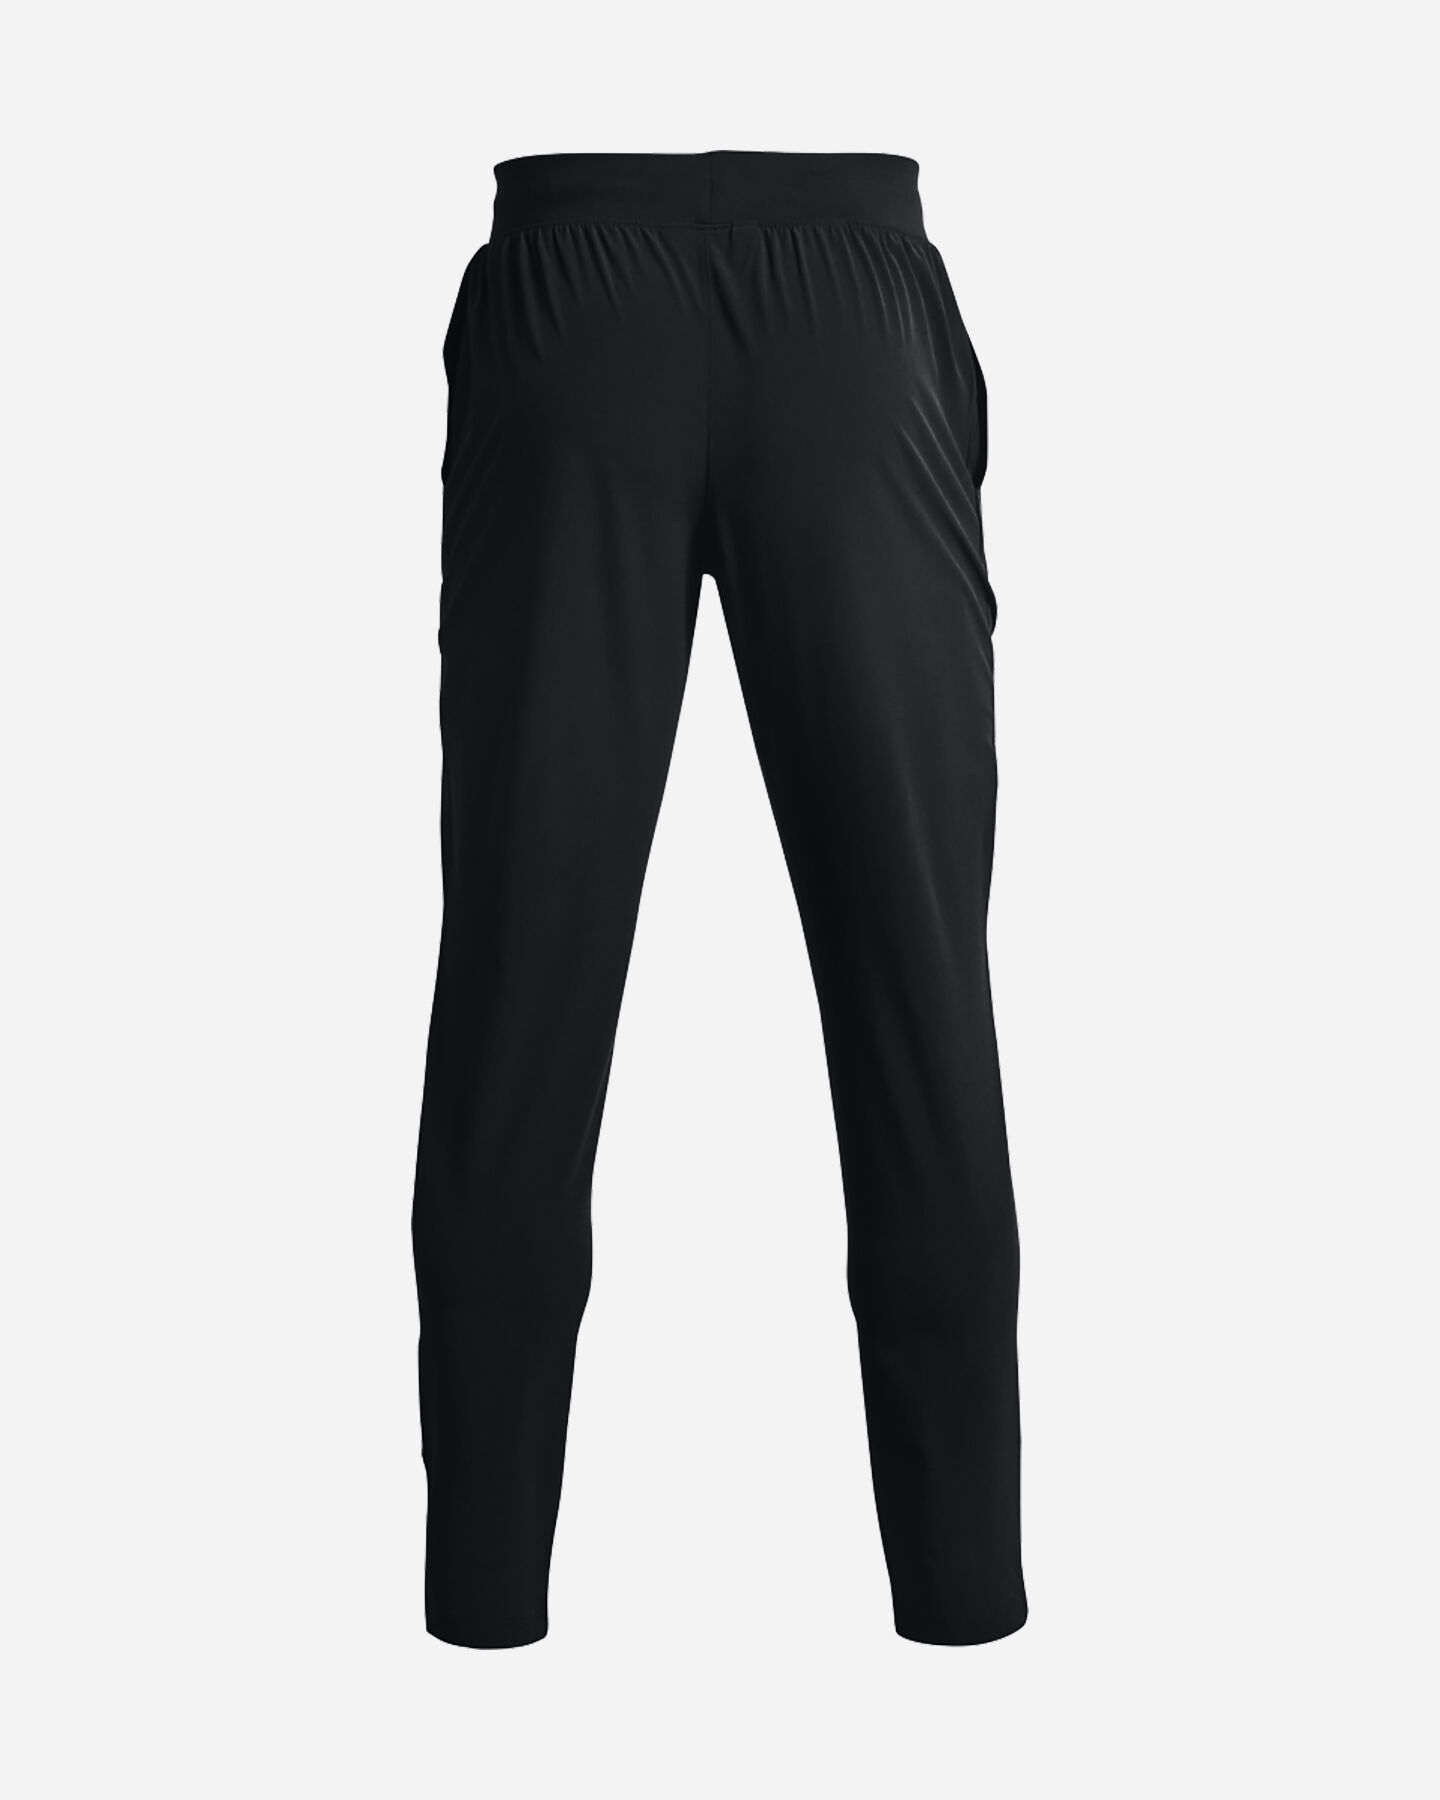  Pantalone training UNDER ARMOUR STRETCH WOVEN M S5336577|0001|XS scatto 1